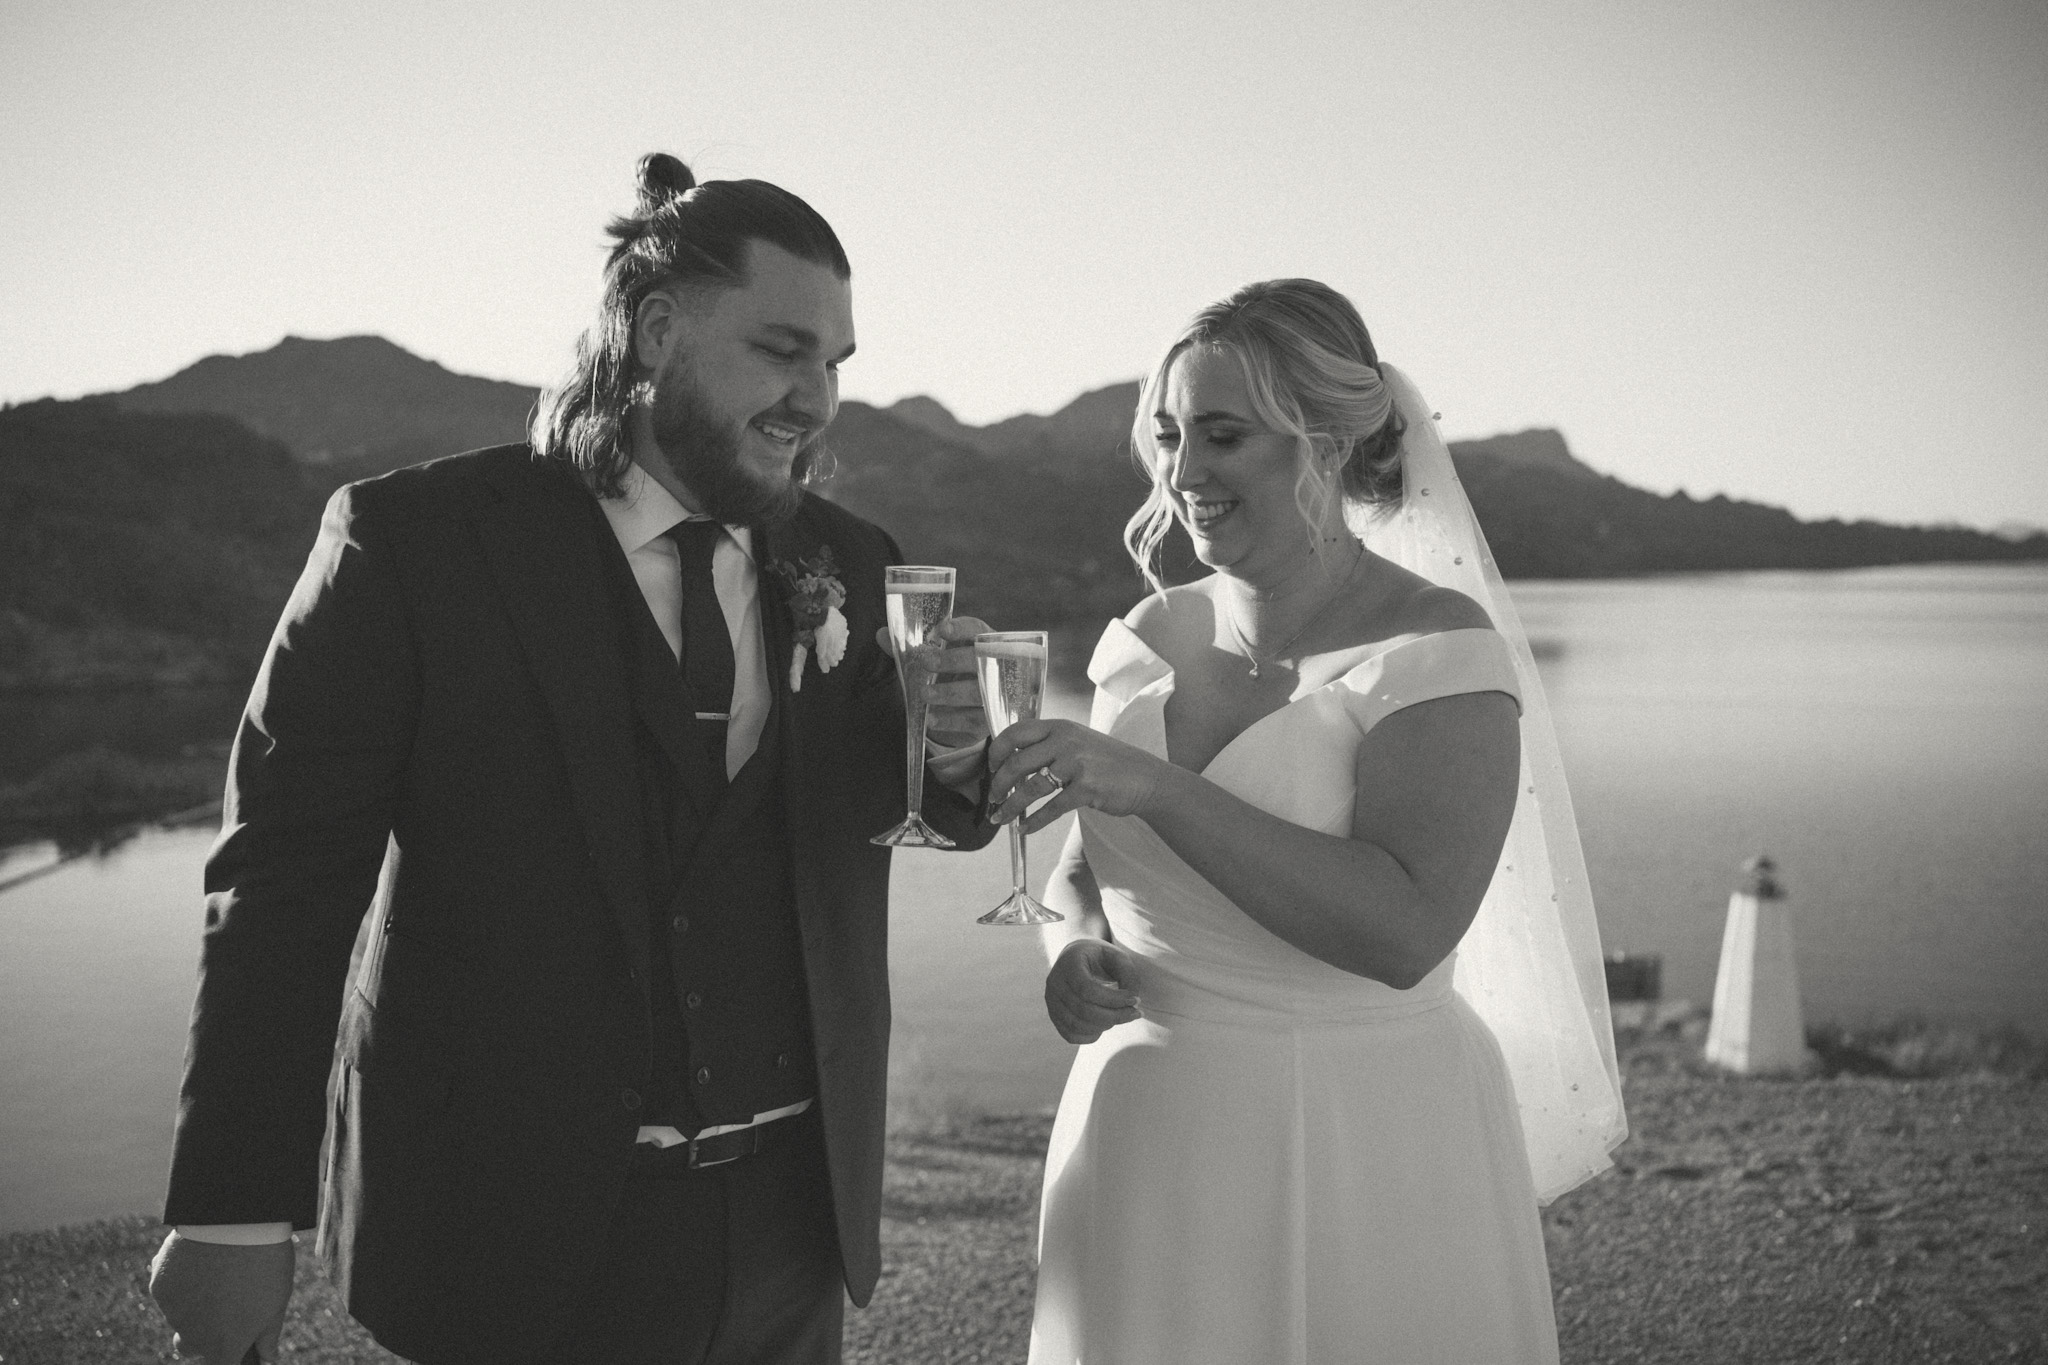 Cheers to your elopement experience
